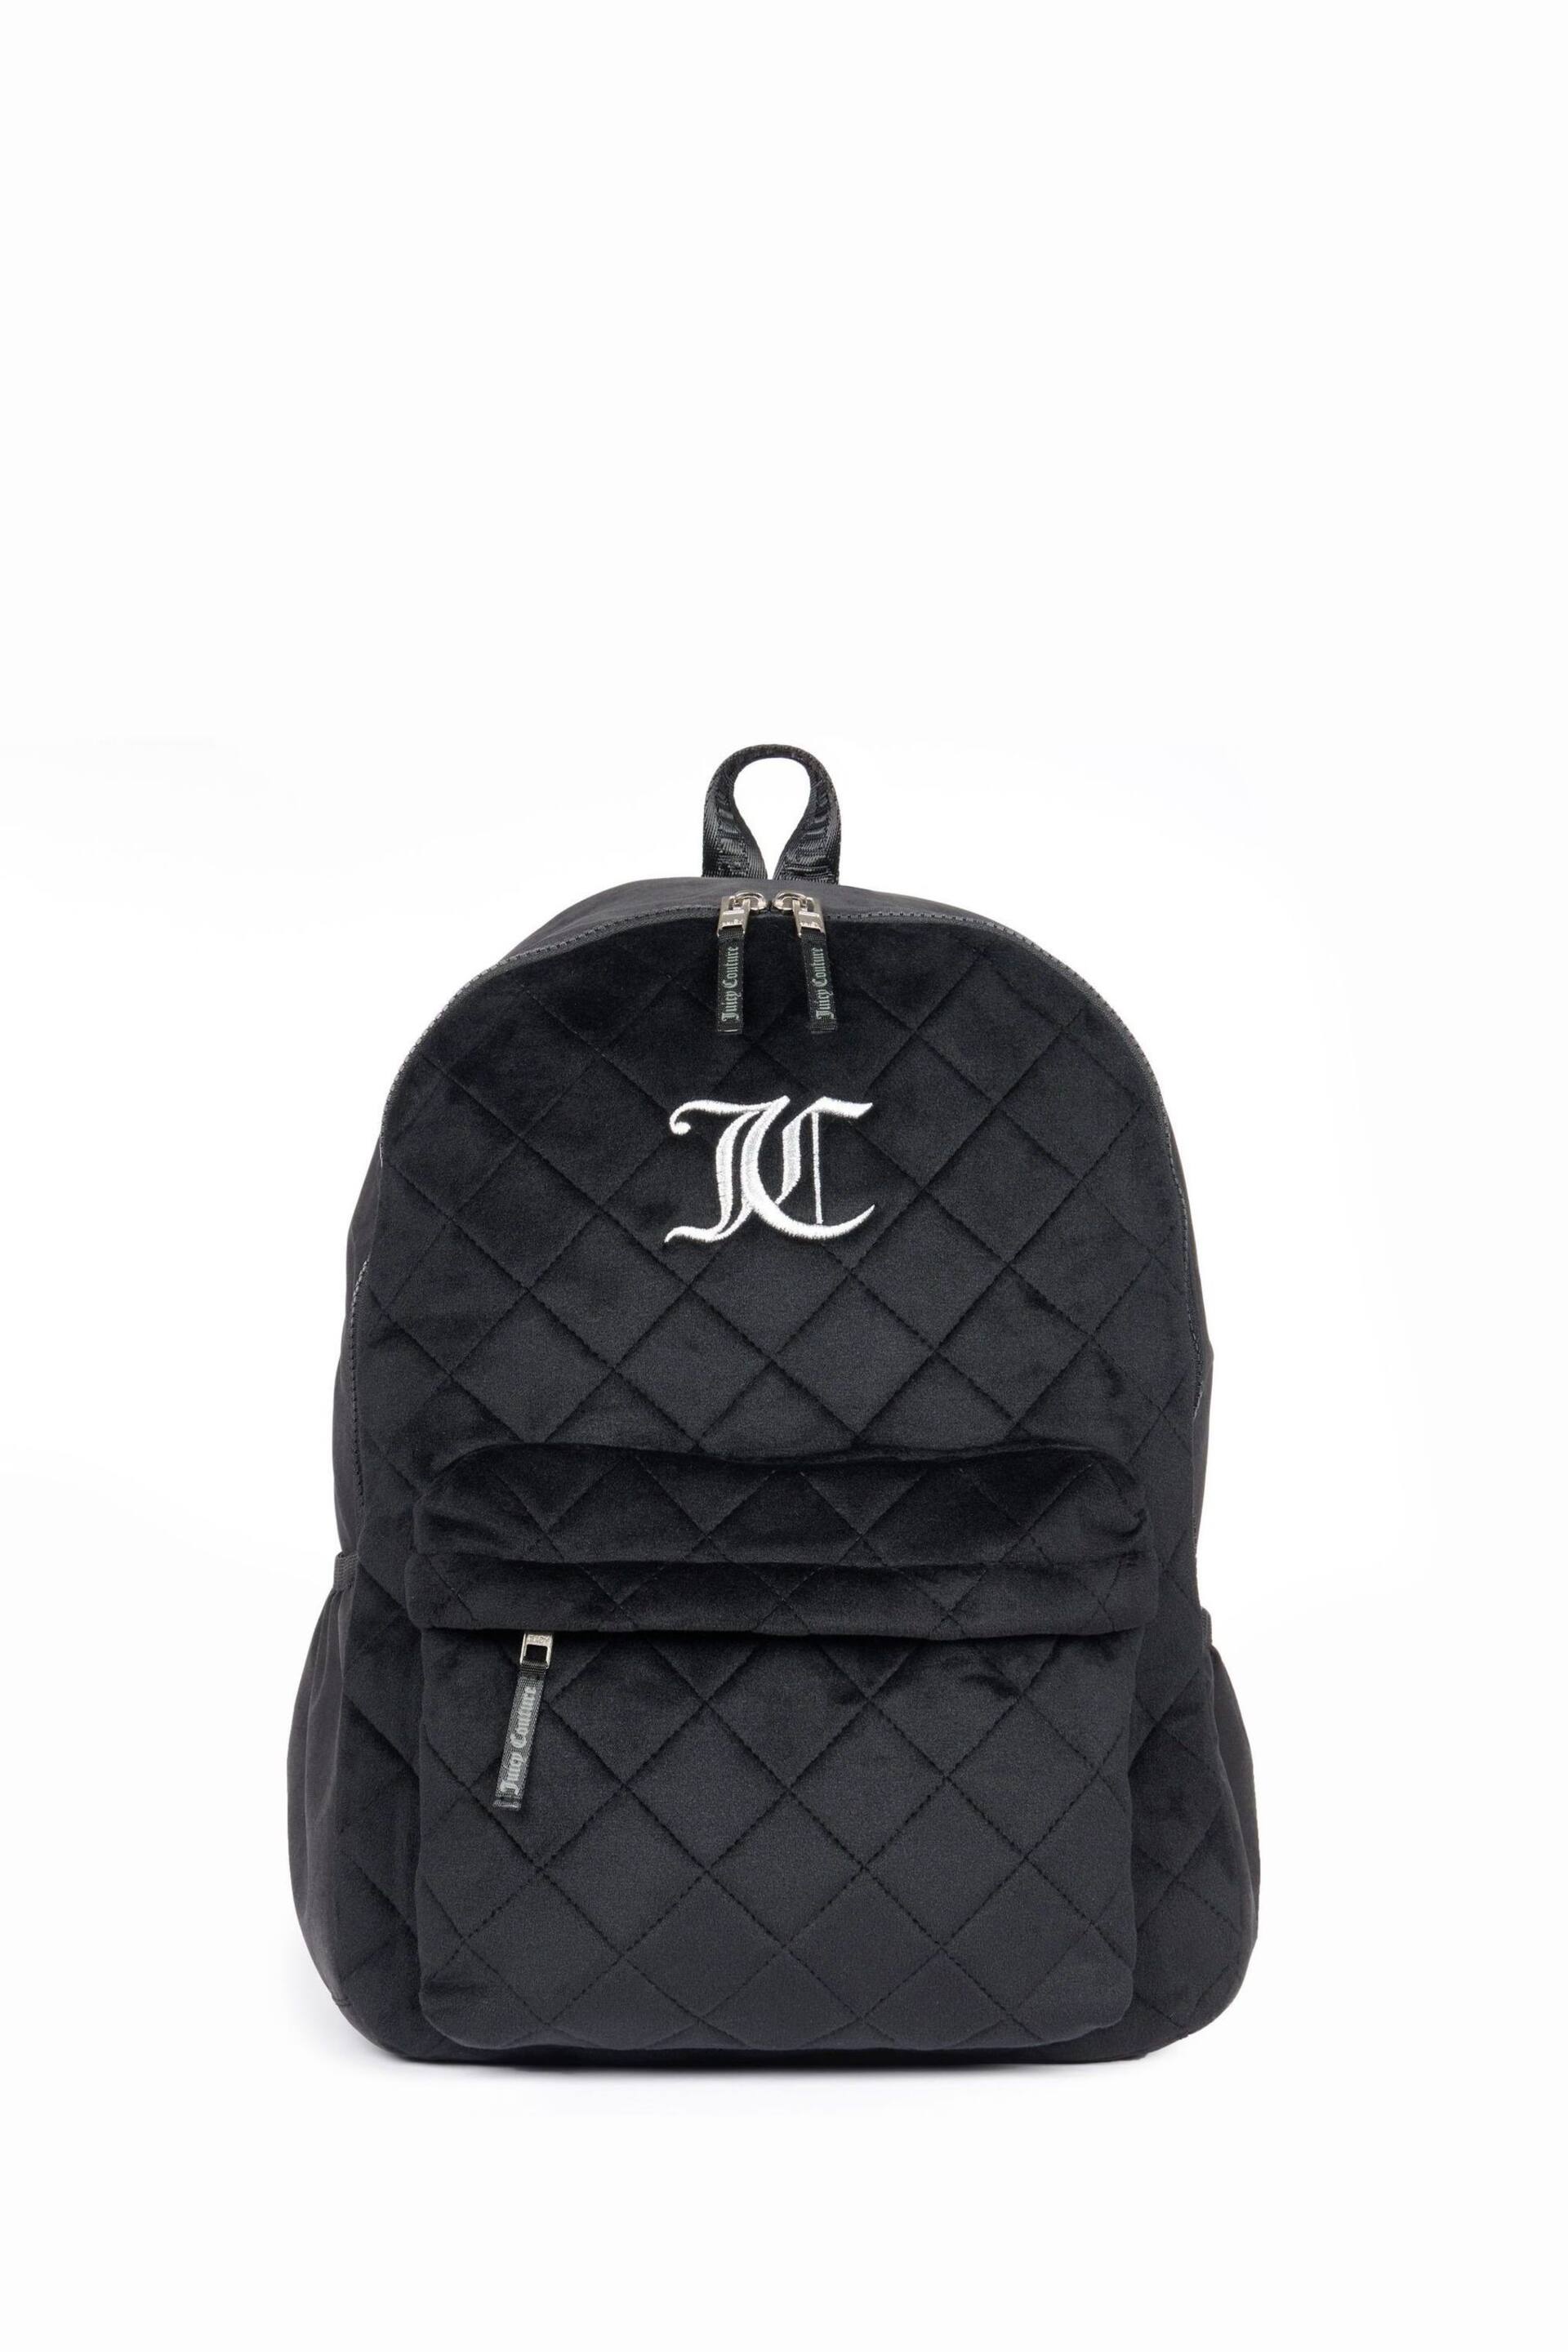 Juicy Couture Girls Quilted Velour Black Backpack - Image 1 of 10